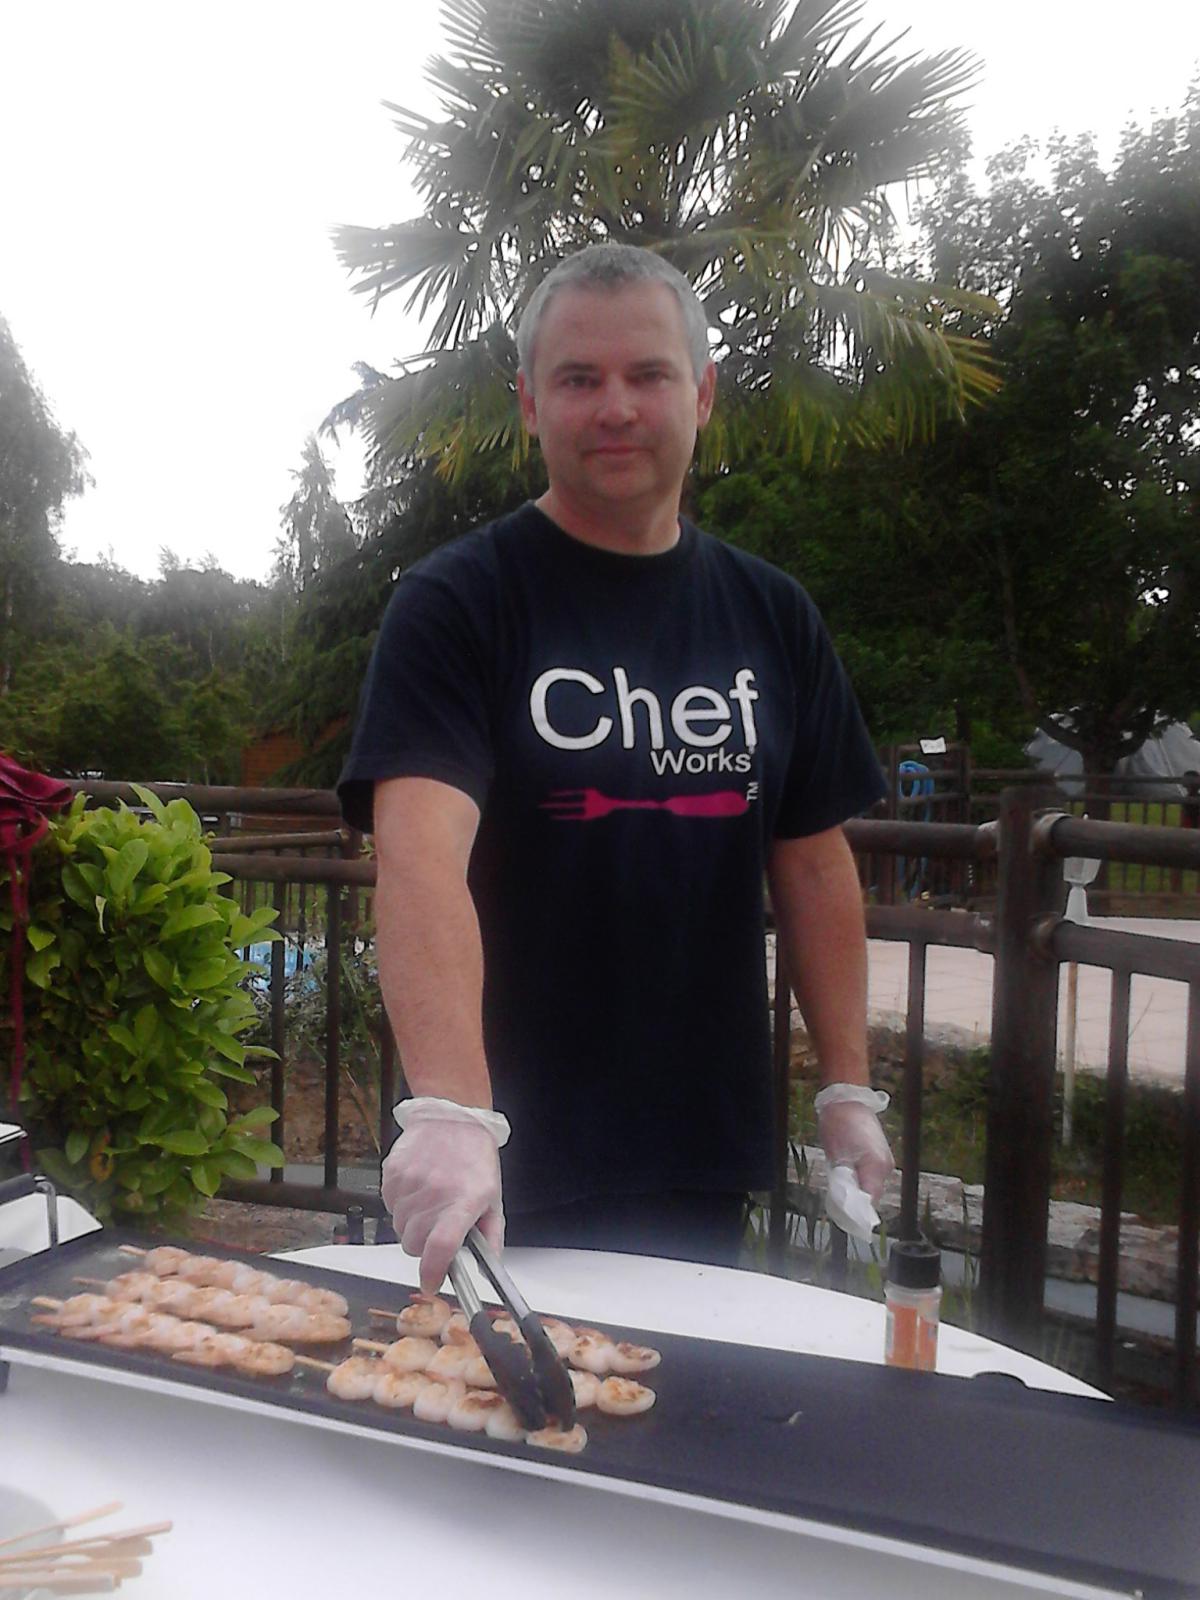 Chef Pascal Sagot, experienced chef offering private catering services for weddings in the Lot valley